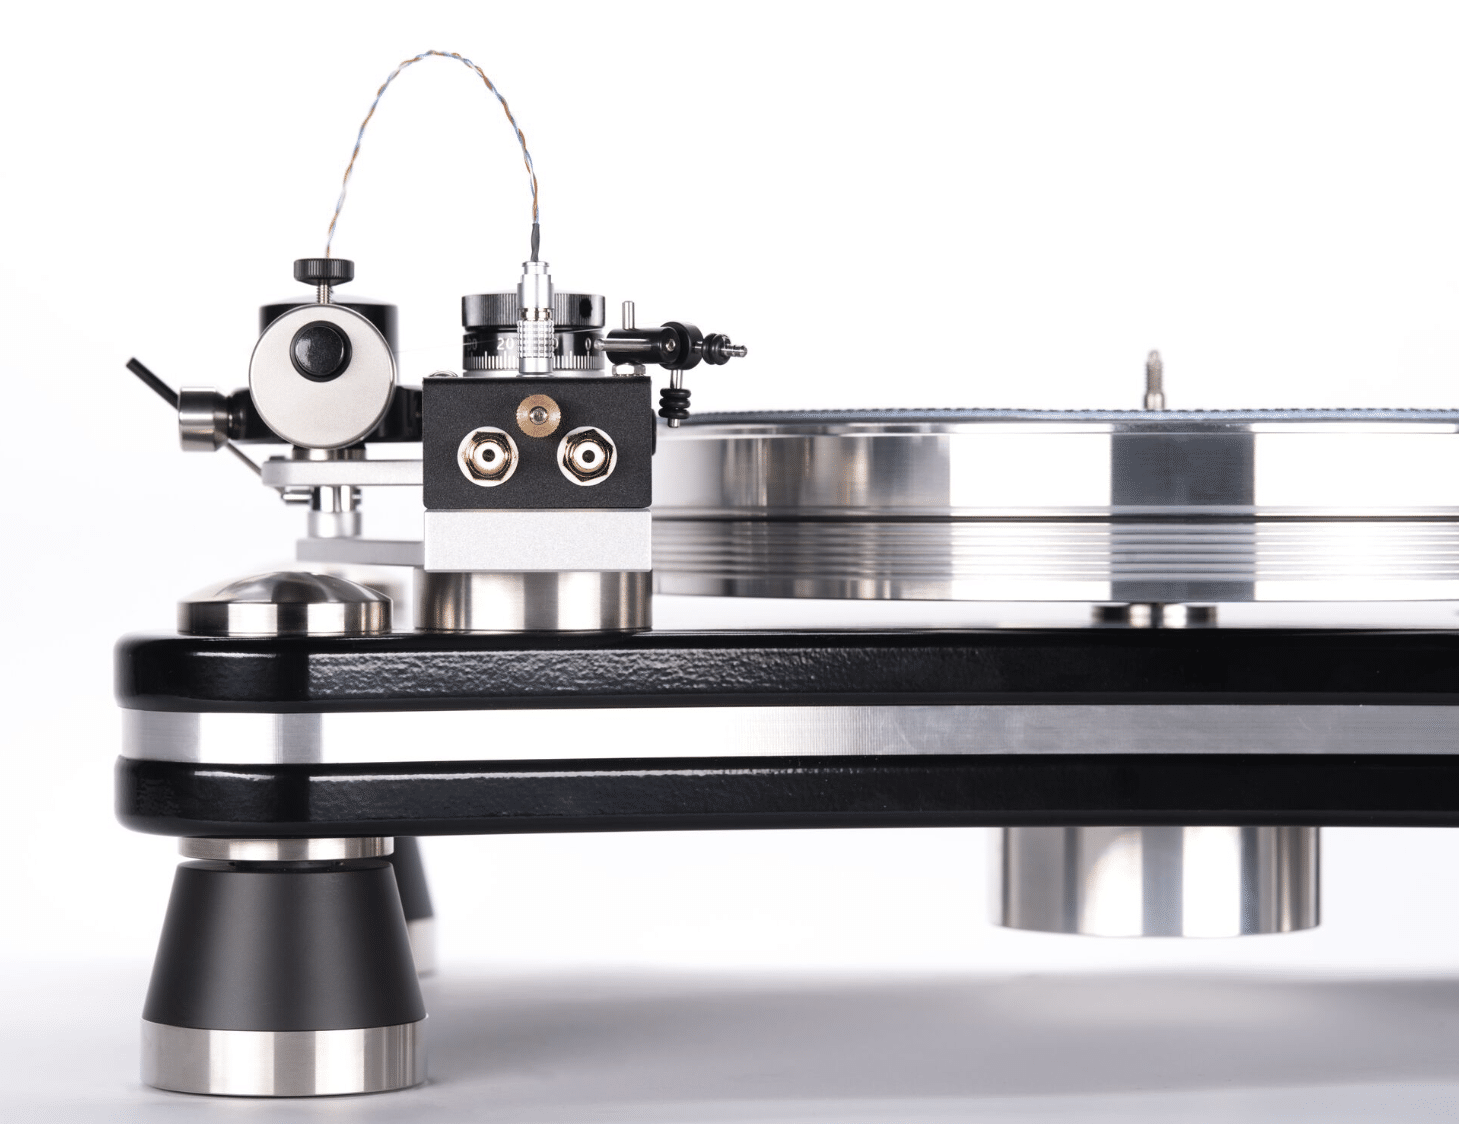 PRIME SIGNATURE TURNTABLE FROM VPI